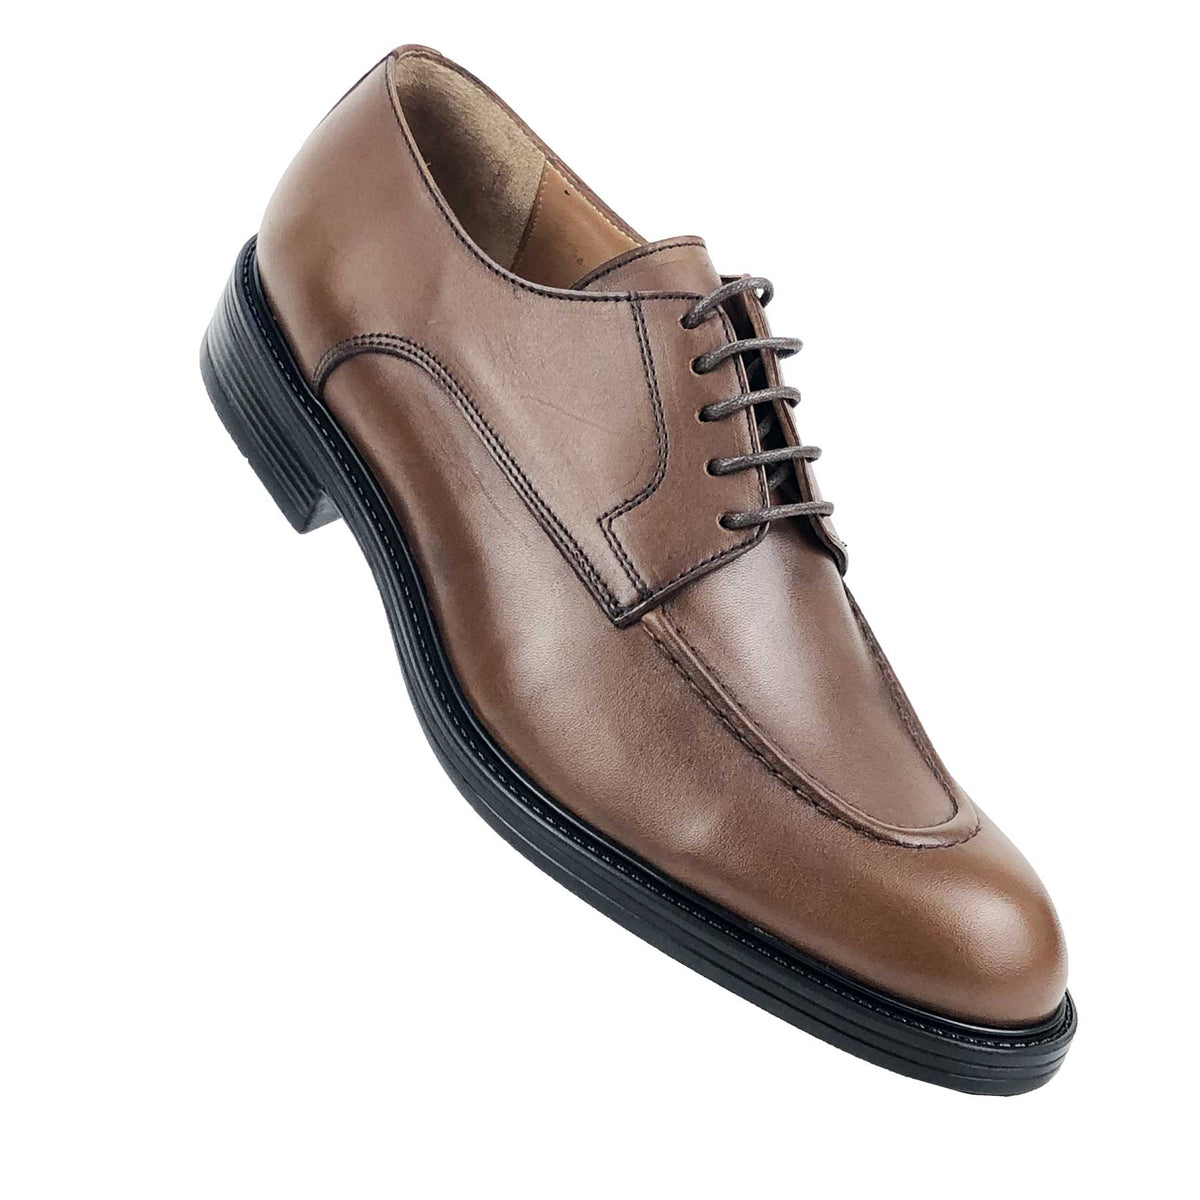 CH396-015 - Chaussure cuir Taba - deluxe-maroc